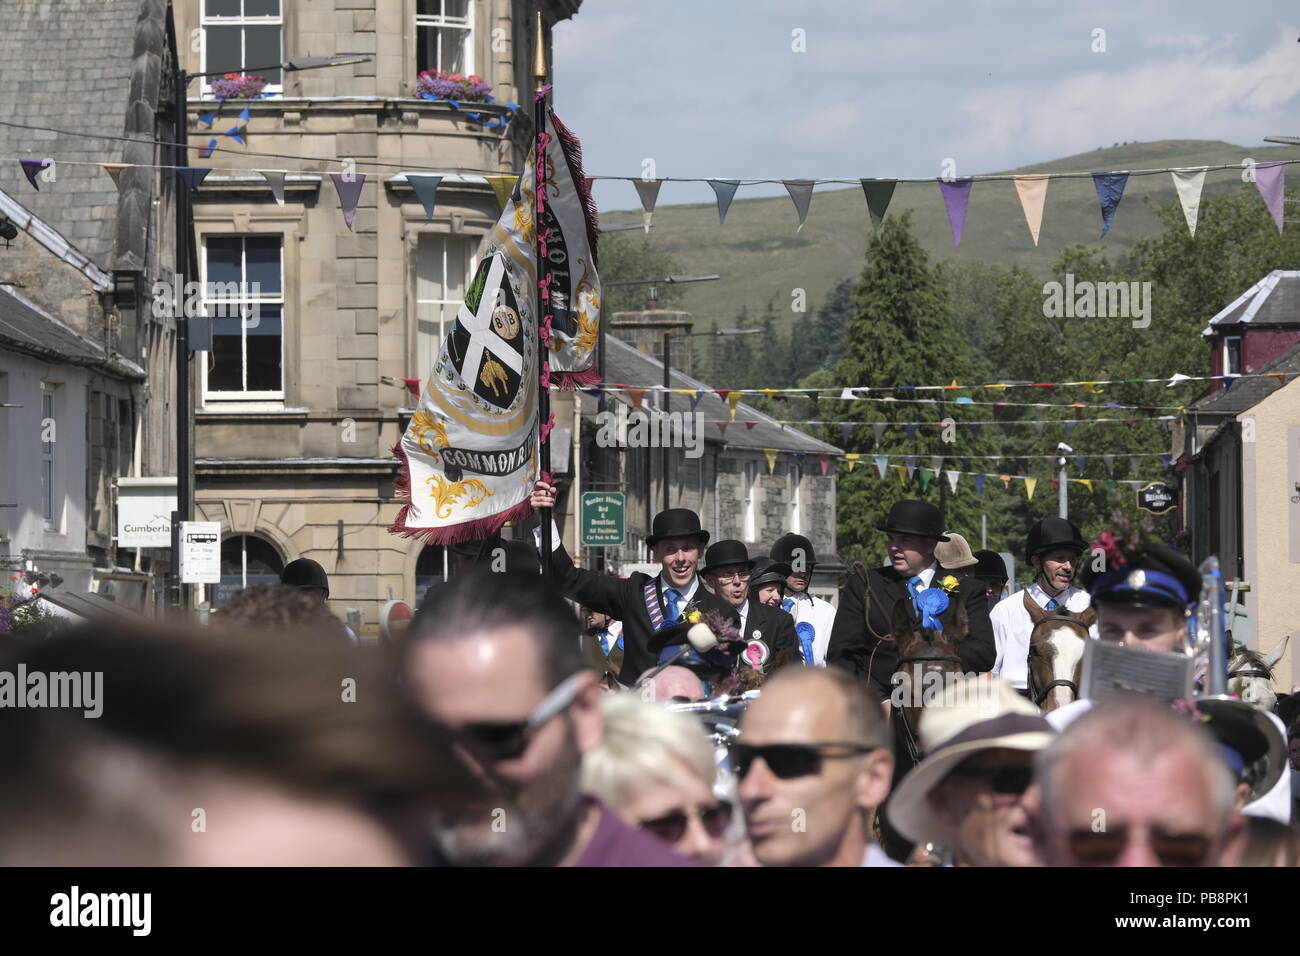 Langholm, Scotland, UK. 27th July, 2018.    Langholm Common Riding - 'Langholm's Great Day' Langholm Cornet Iain Little leading the cavalcade behind the emblems of the town, a spade, a barley banner nailed to a board, the crown and the thistle, lead the parade back thru town in Langholm, 'The Muckle Toon' has seen tradition upheld for over 250 years with the Annual Langholm Common Riding which takes place every year on the last Friday in July, This year falling on Friday 27th.   Credit: Rob Gray/Alamy Live News Stock Photo